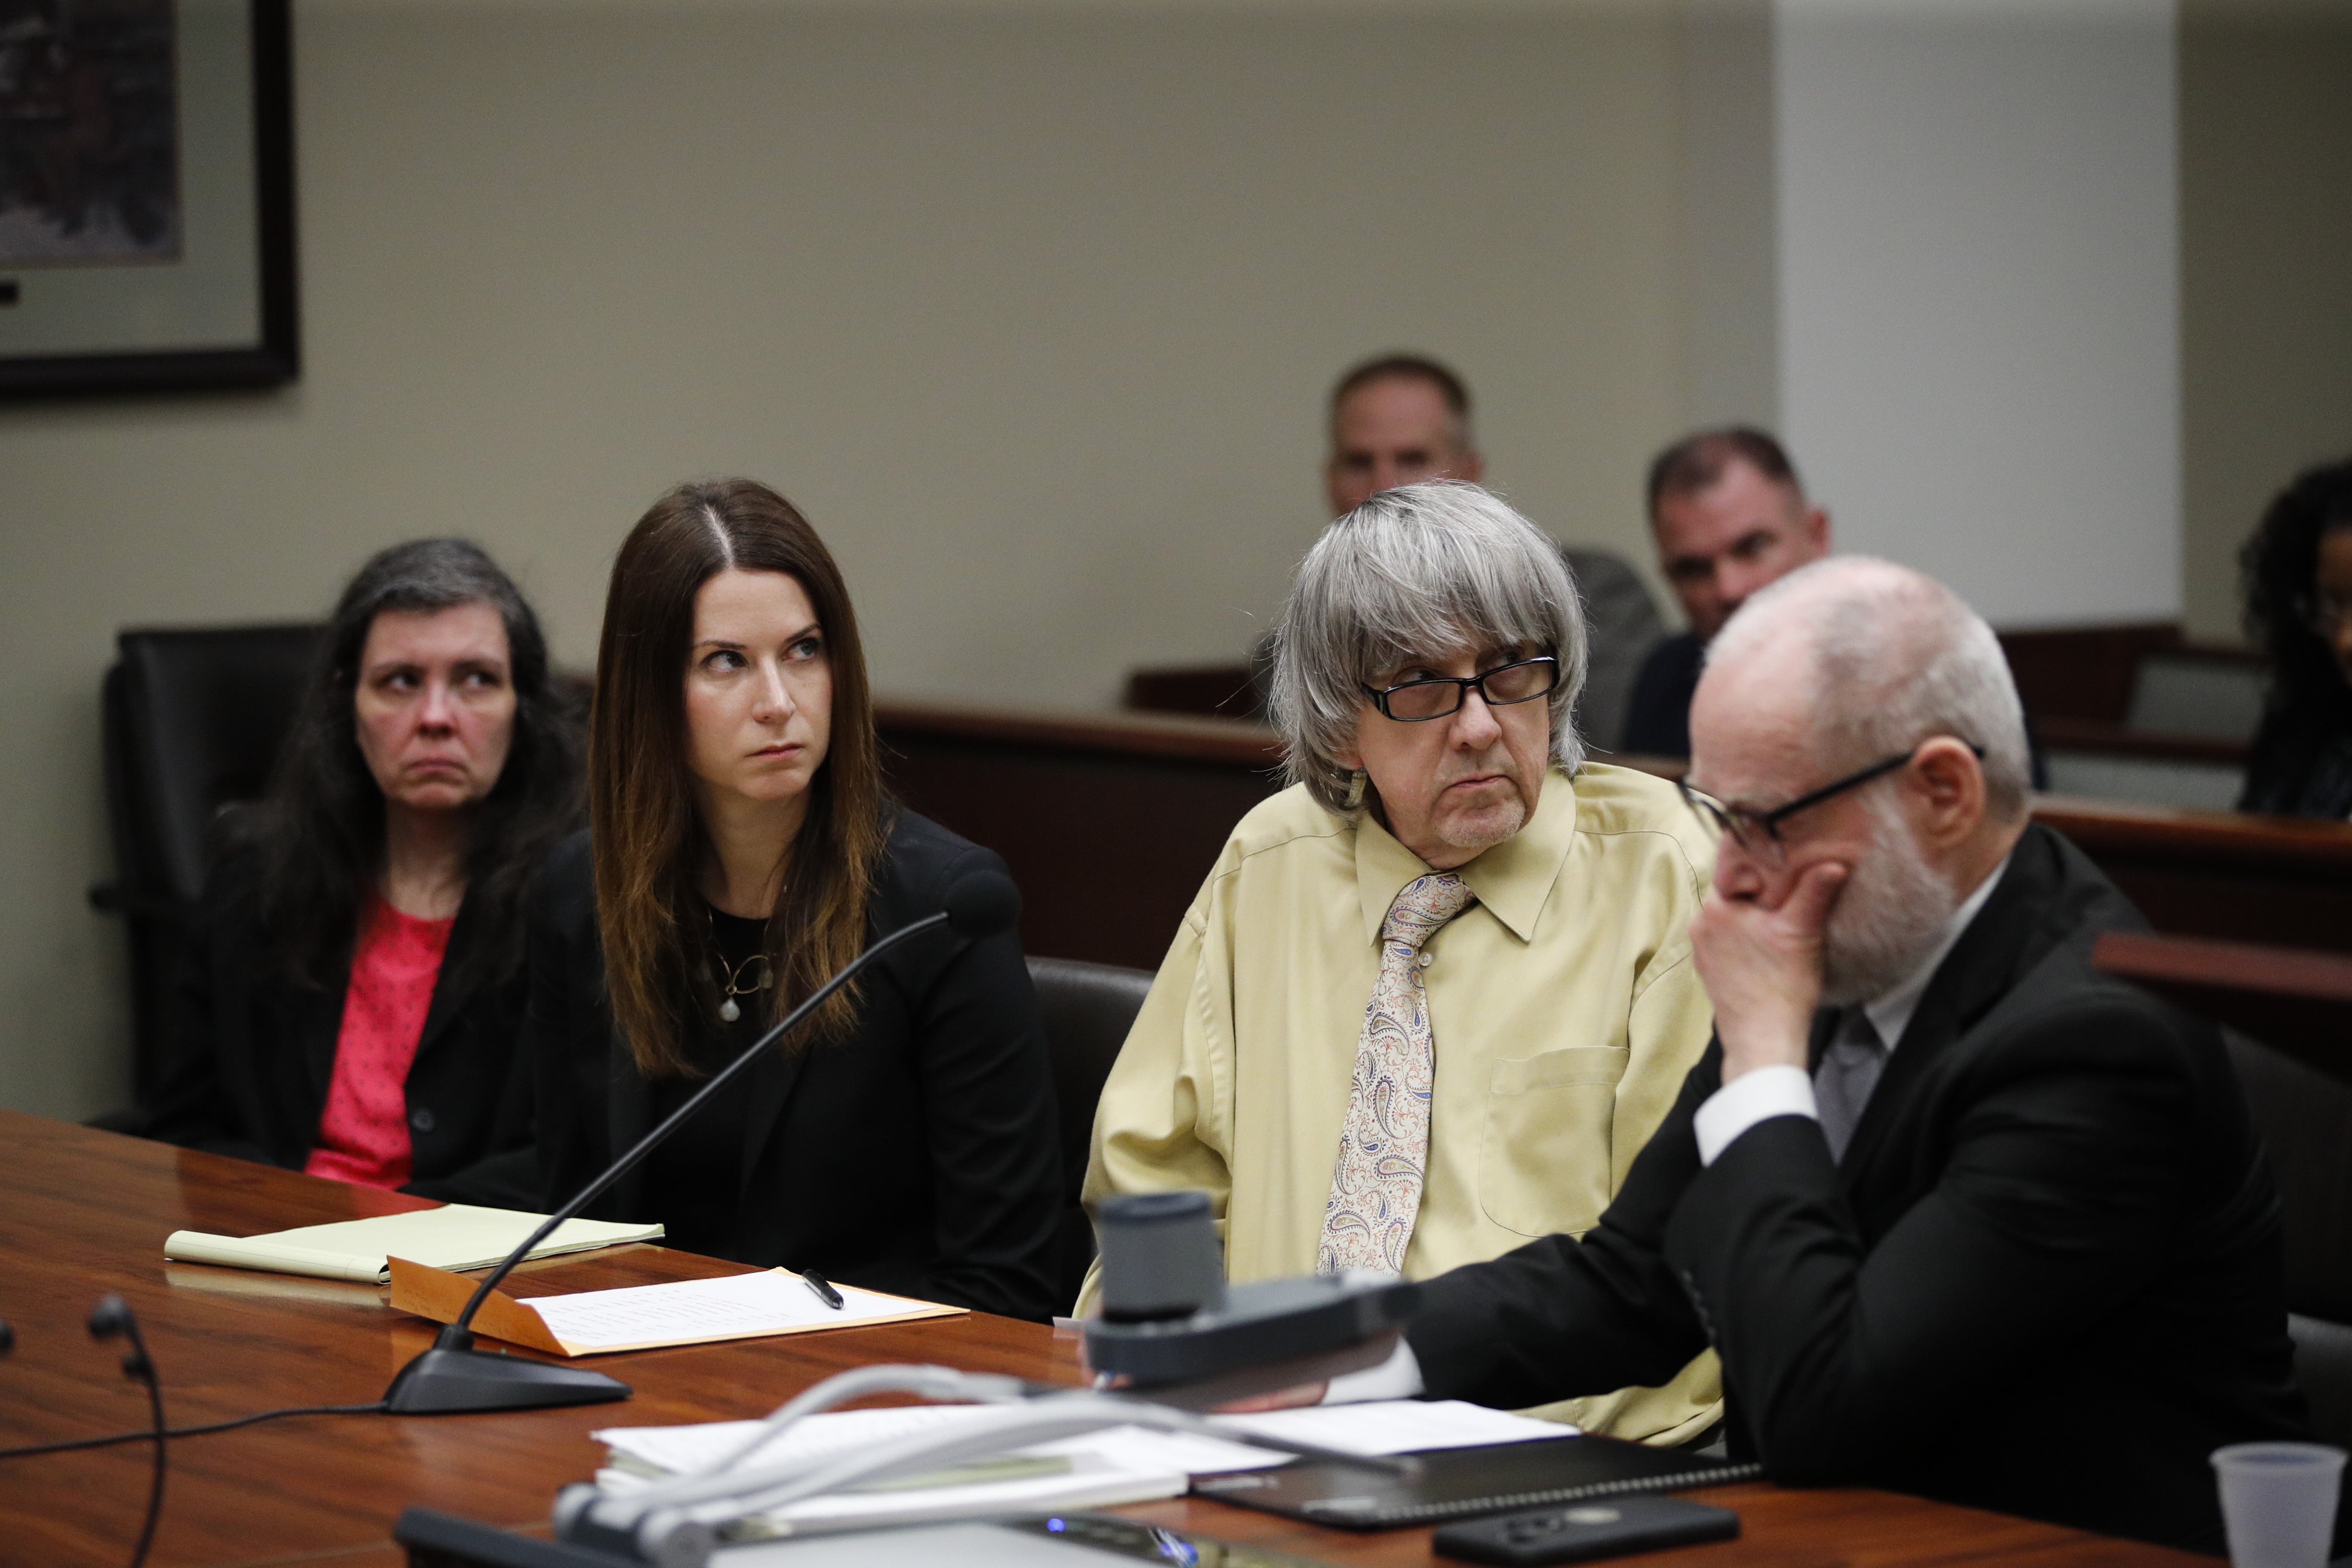 David Turpin, second from right, and wife, Louise, far left, listen to their charges as they are joined by their attorneys, Allison Lowe, second from left, and David Macher during a courtroom hearing, Friday, Feb. 22, 2019, in Riverside, Calif. The California couple who shackled some of their 13 children to beds and starved them pleaded guilty Friday to torture and other abuse in a case dubbed a "house of horrors." (AP Photo/Jae C.